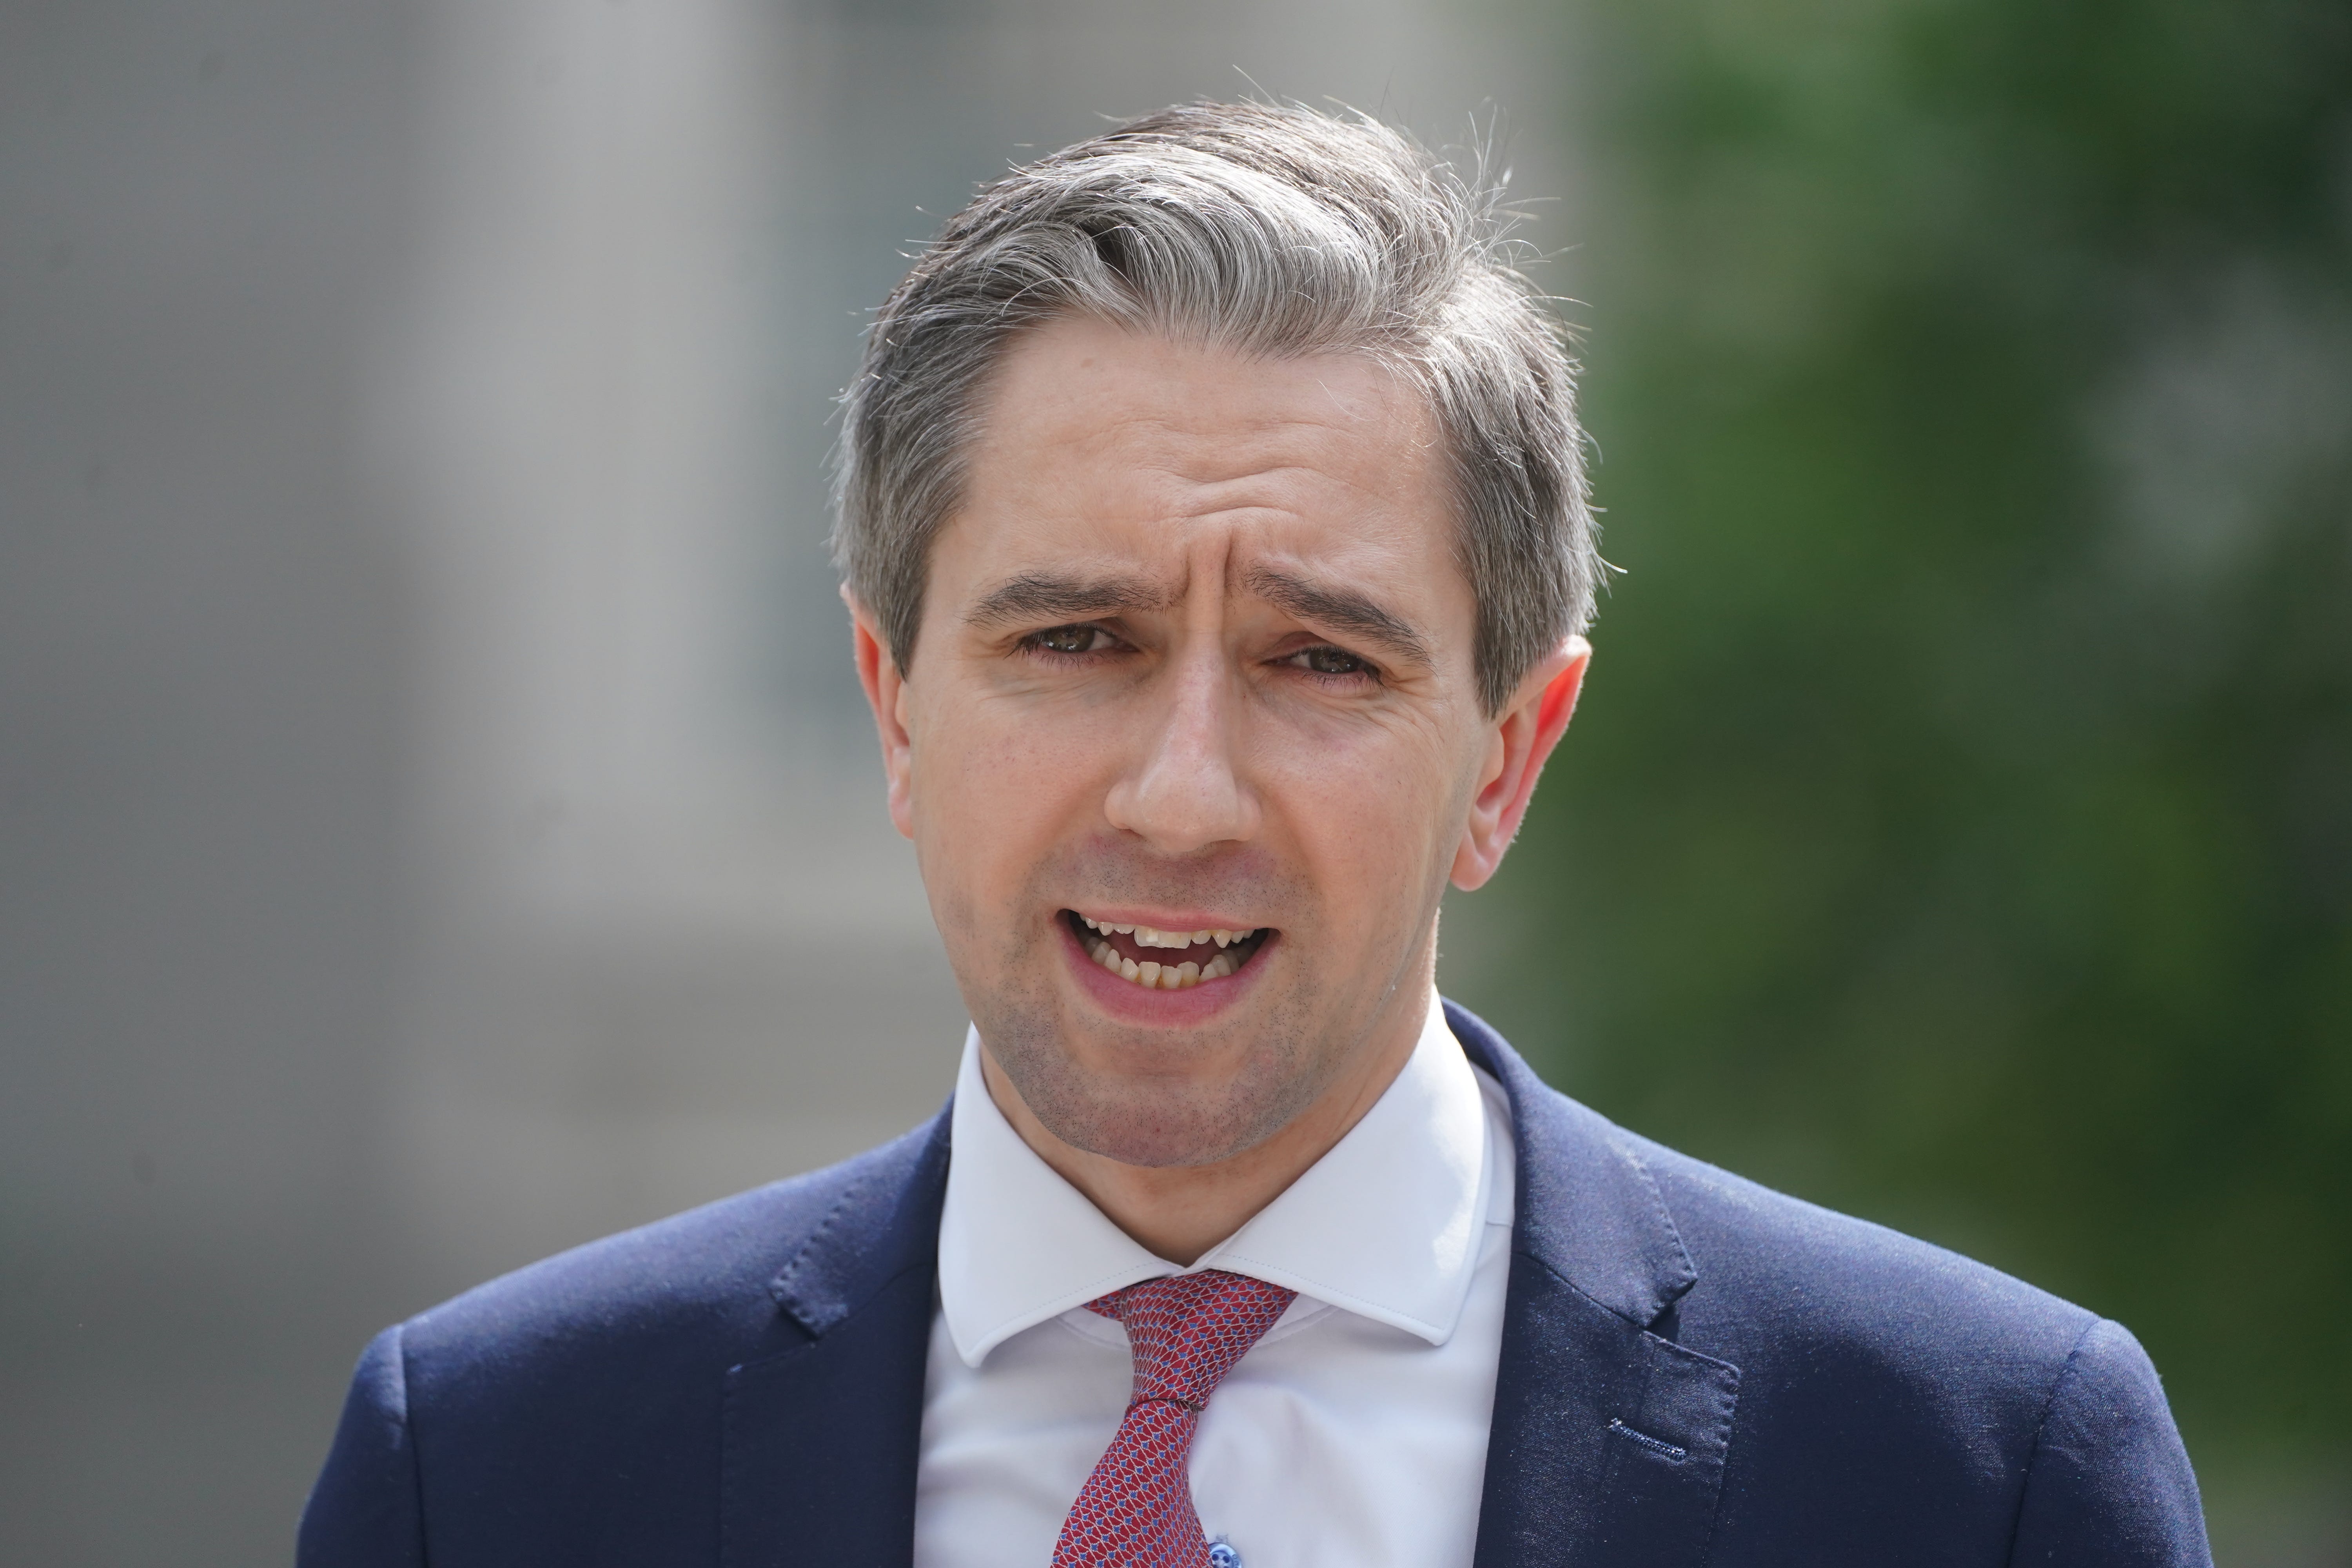 Minister for Further and Higher Education Simon Harris is the frontrunner